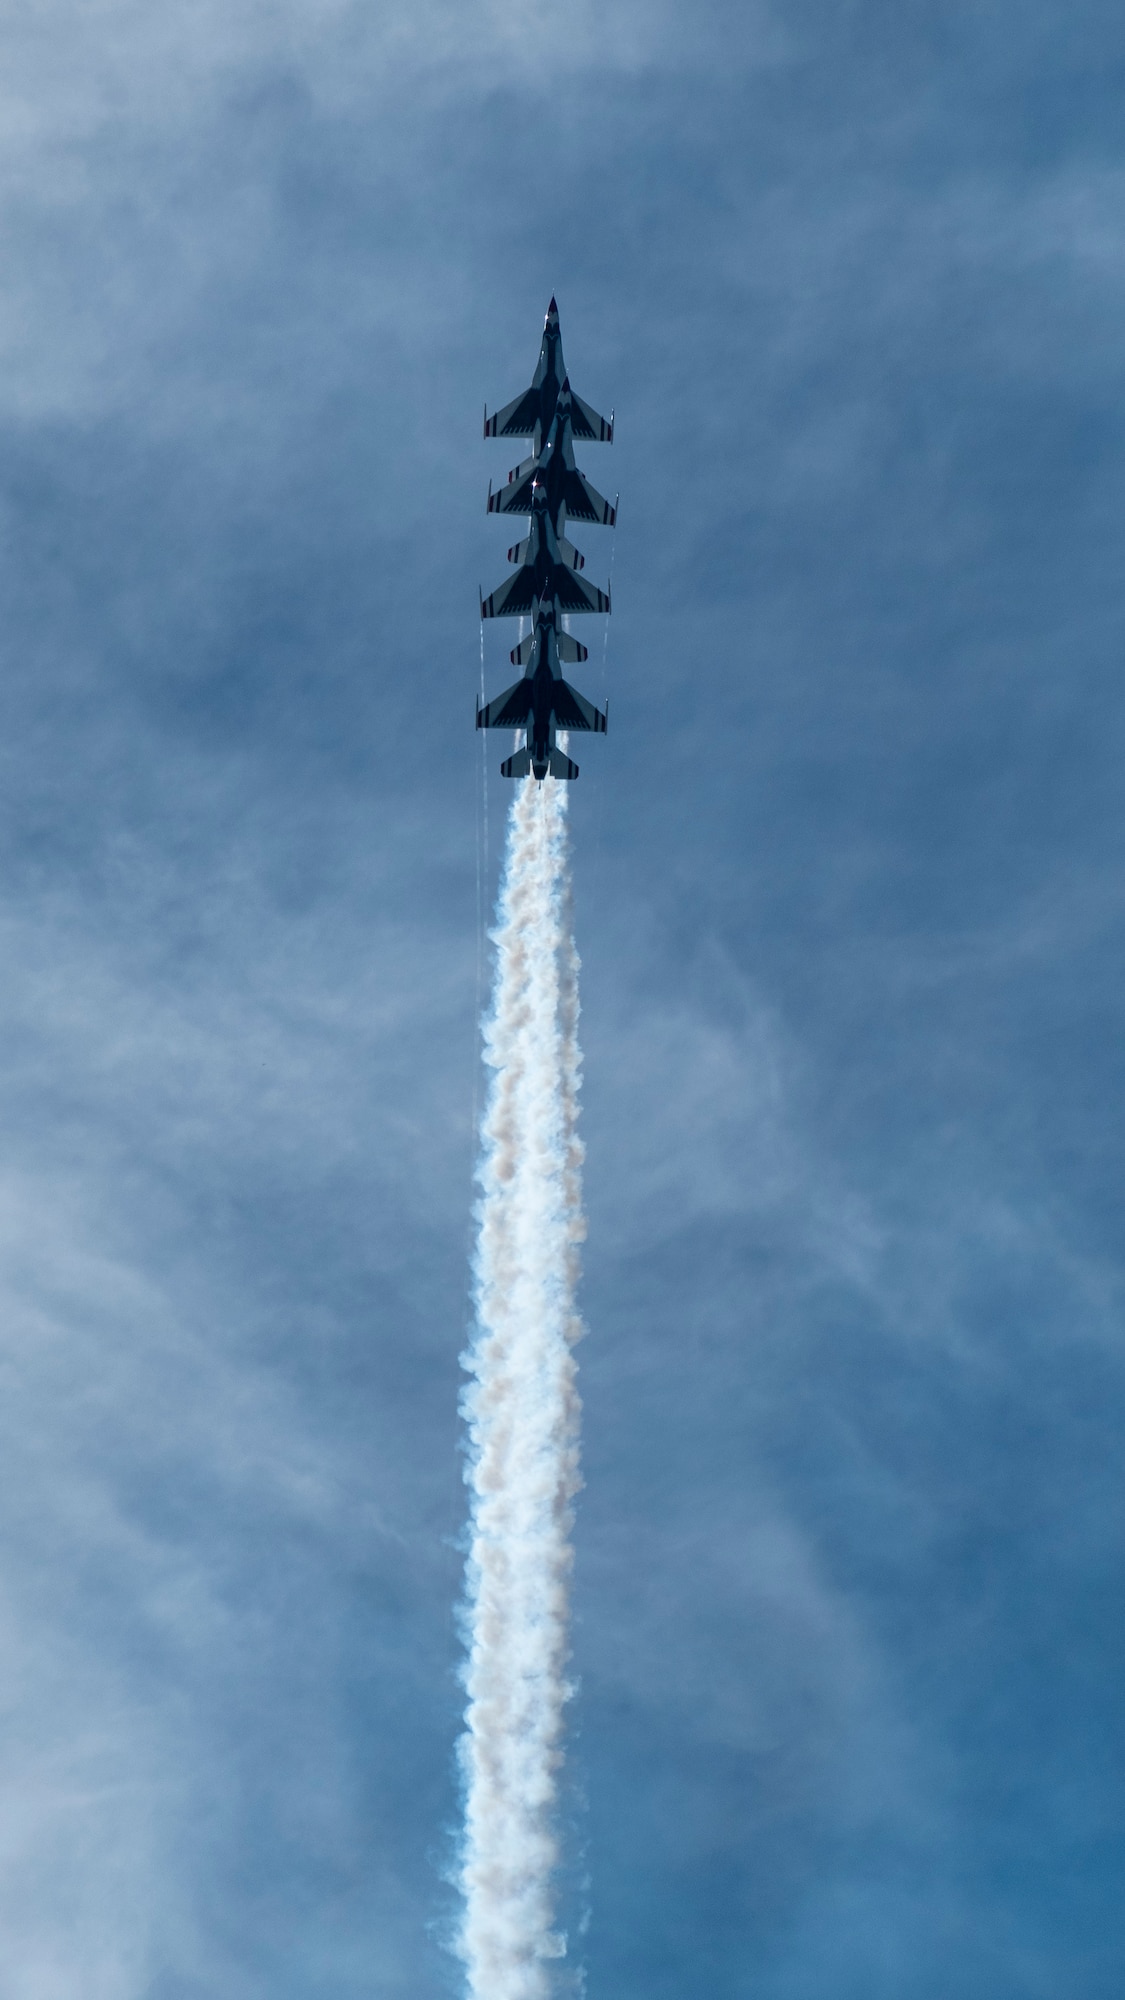 Members of the U.S. Thunderbirds perform for Team McConnell at the Frontiers in Flight Open House and Airshow Sept. 9, 2018, McConnell Air Force Base, Kan. In 1953 the Air Force activated the 3600th Demonstration Unit, which adopted the name “Thunderbirds,” establishing a 55-year heritage of displaying the capabilities of the most powerful Air Force in the world. (U.S. Air Force Photo by Staff Sgt. Preston Webb)